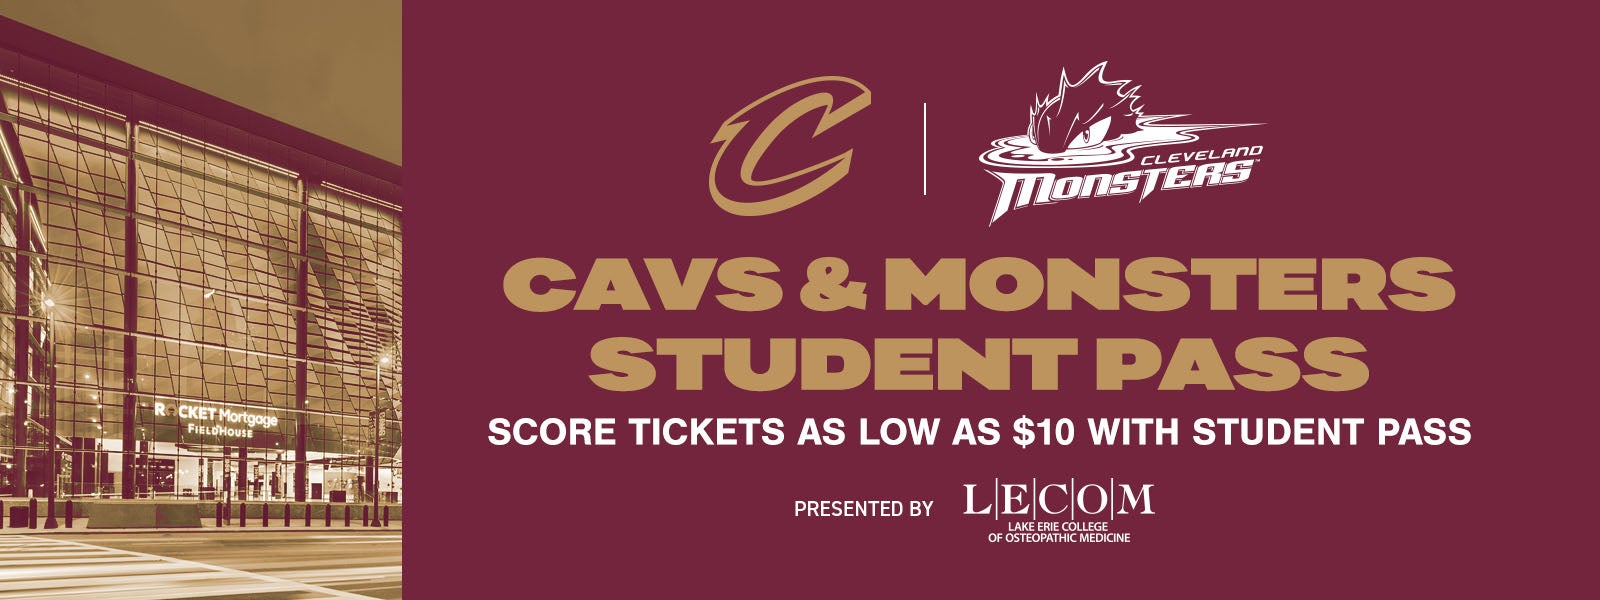 Cavaliers & Monsters Student Pass, presented by LECOM